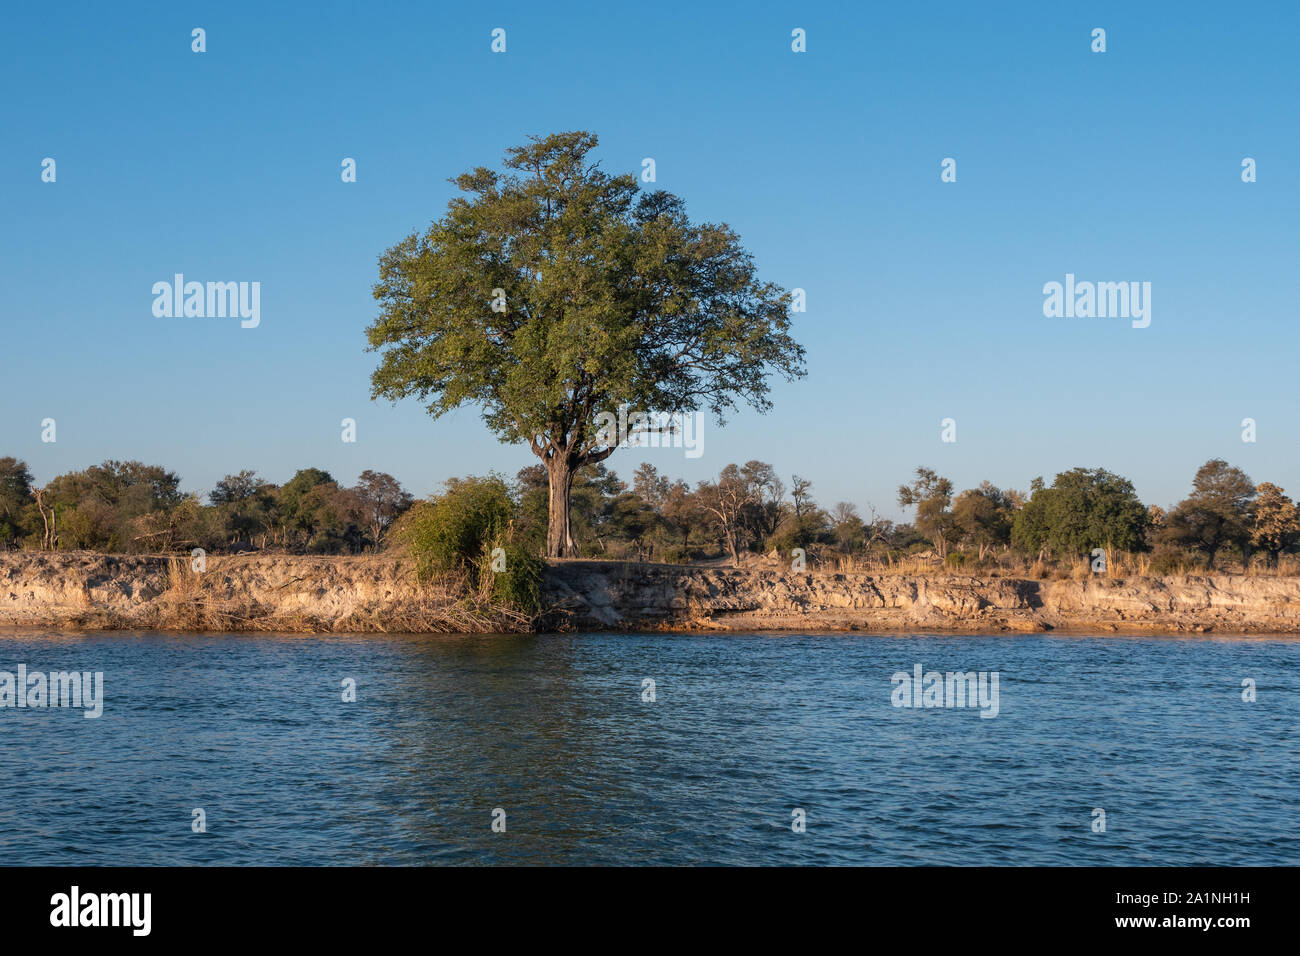 Landscape on the Bank of the River Okavango with Trees and Bushes in Namibia, Africa Stock Photo